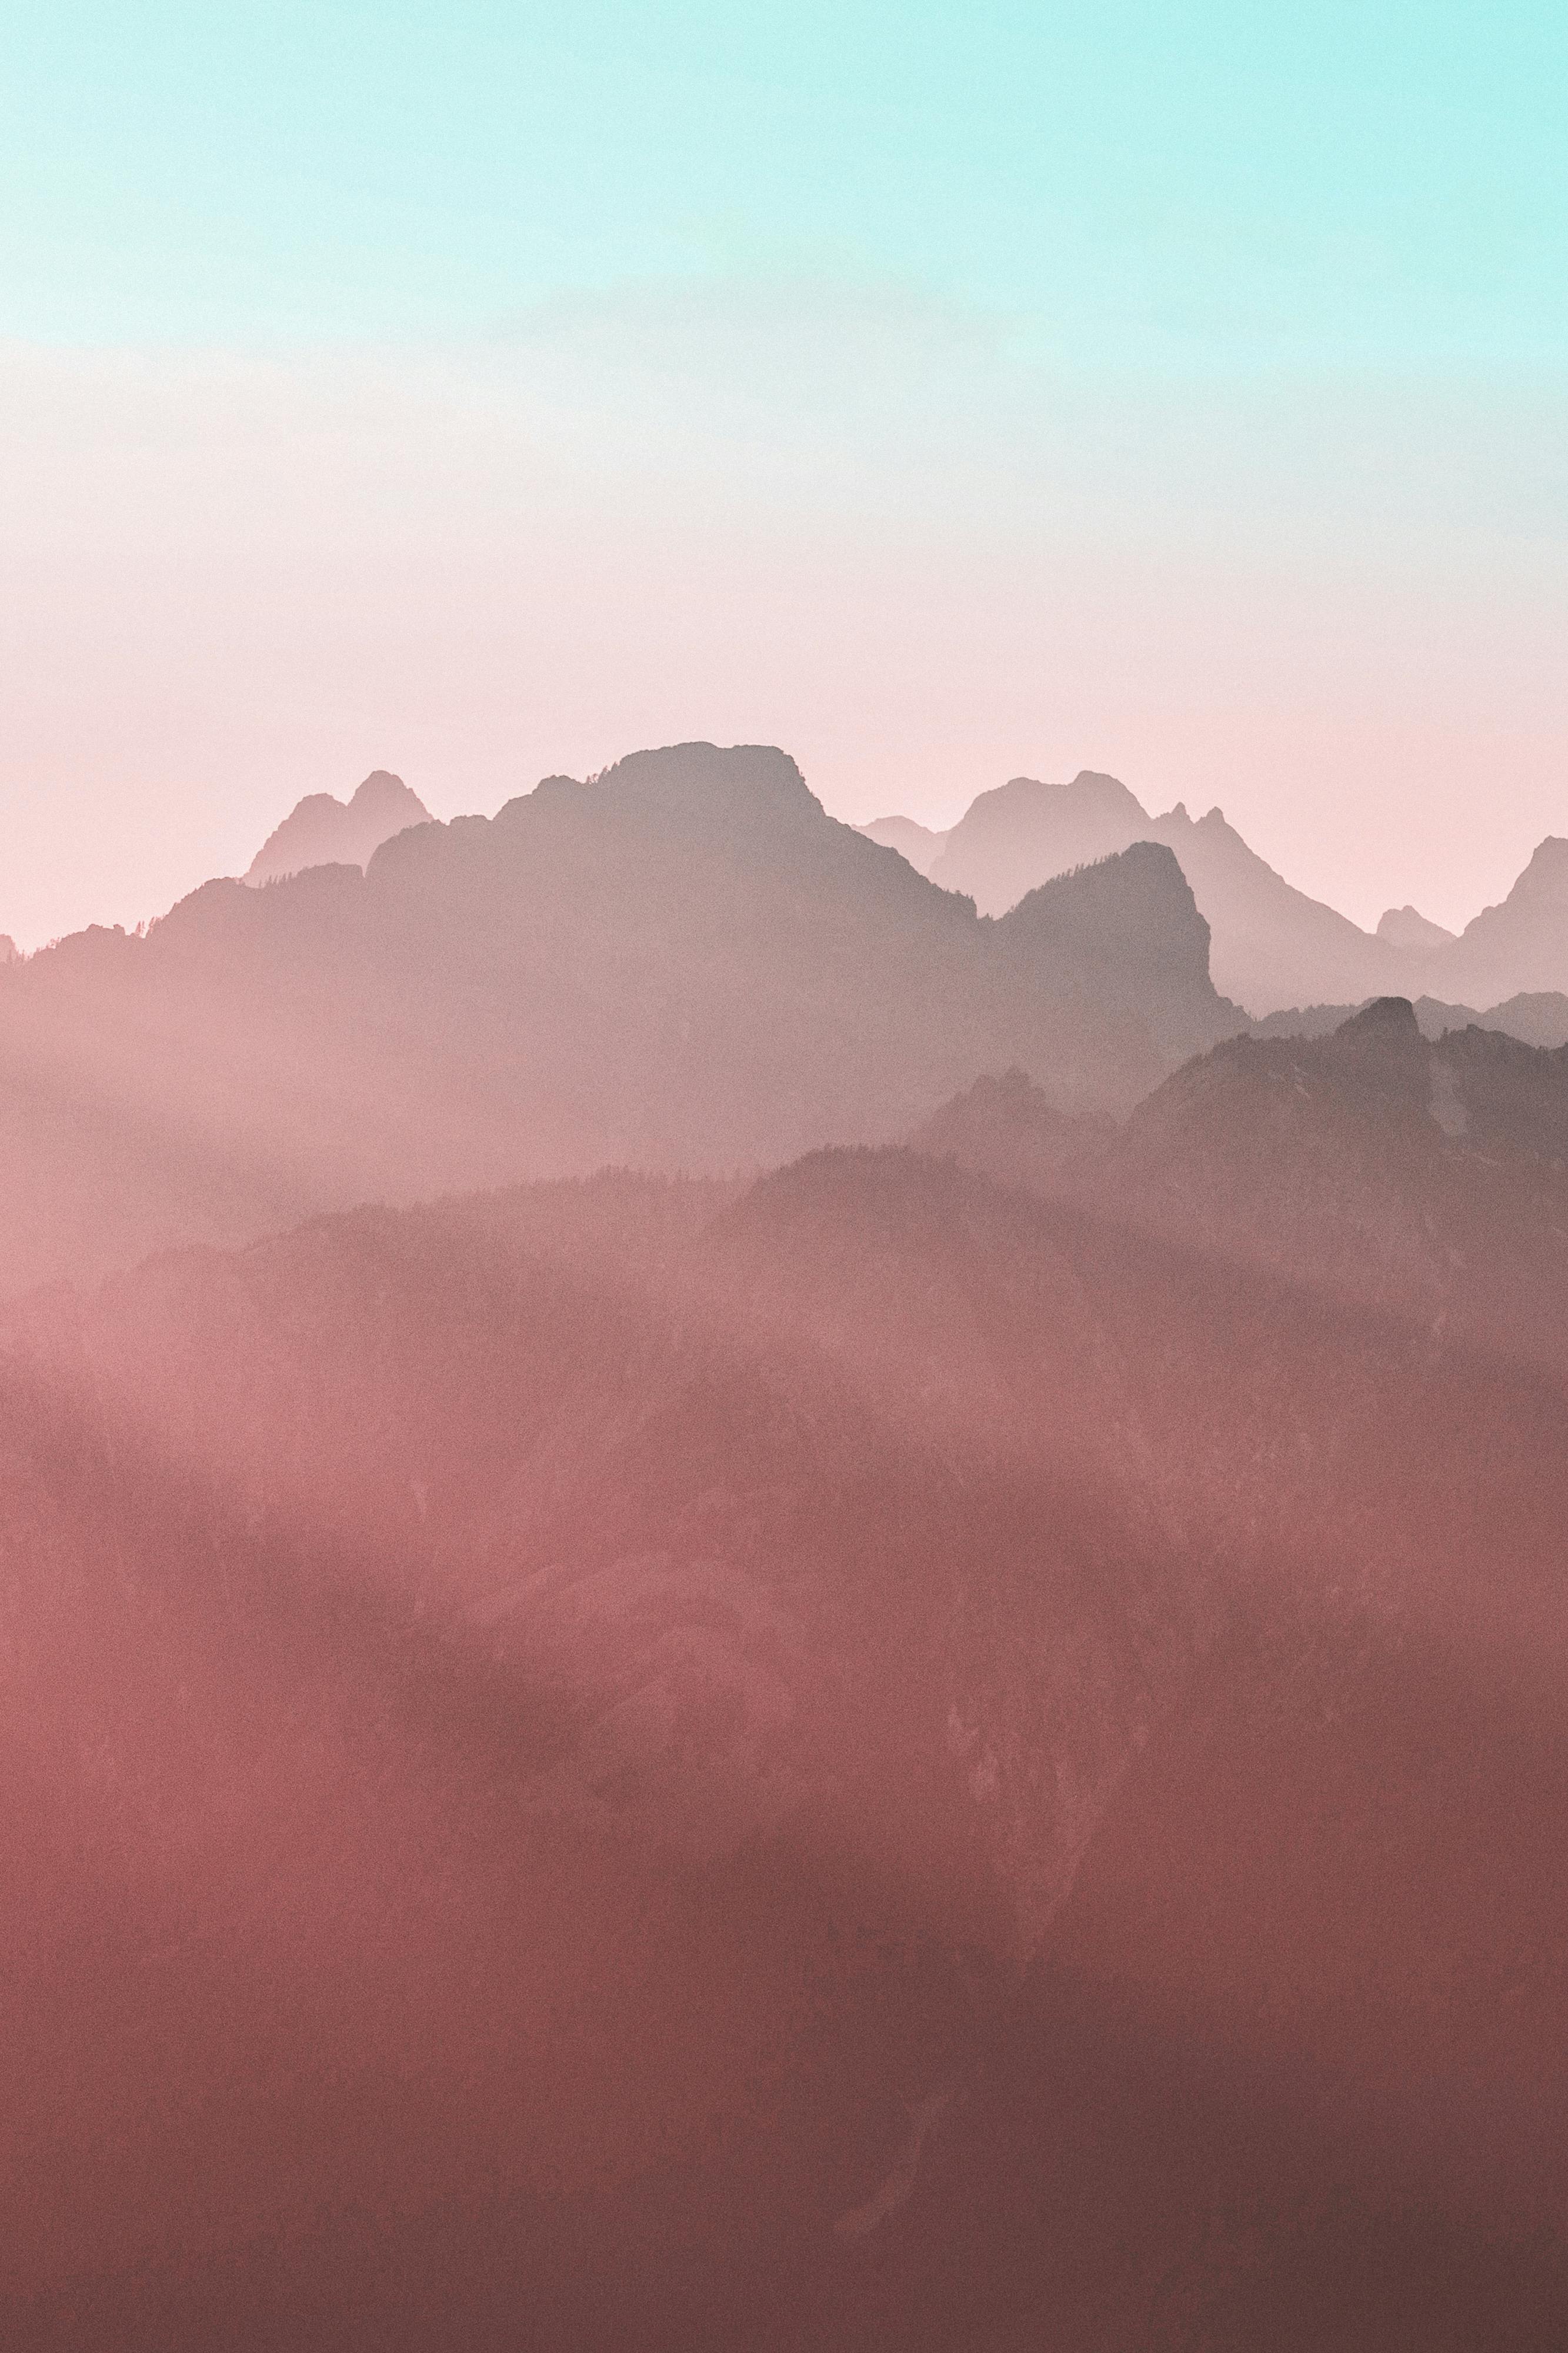 Silhouette of Mountains during Daytime · Free Stock Photo - 2666 x 4000 jpeg 1978kB